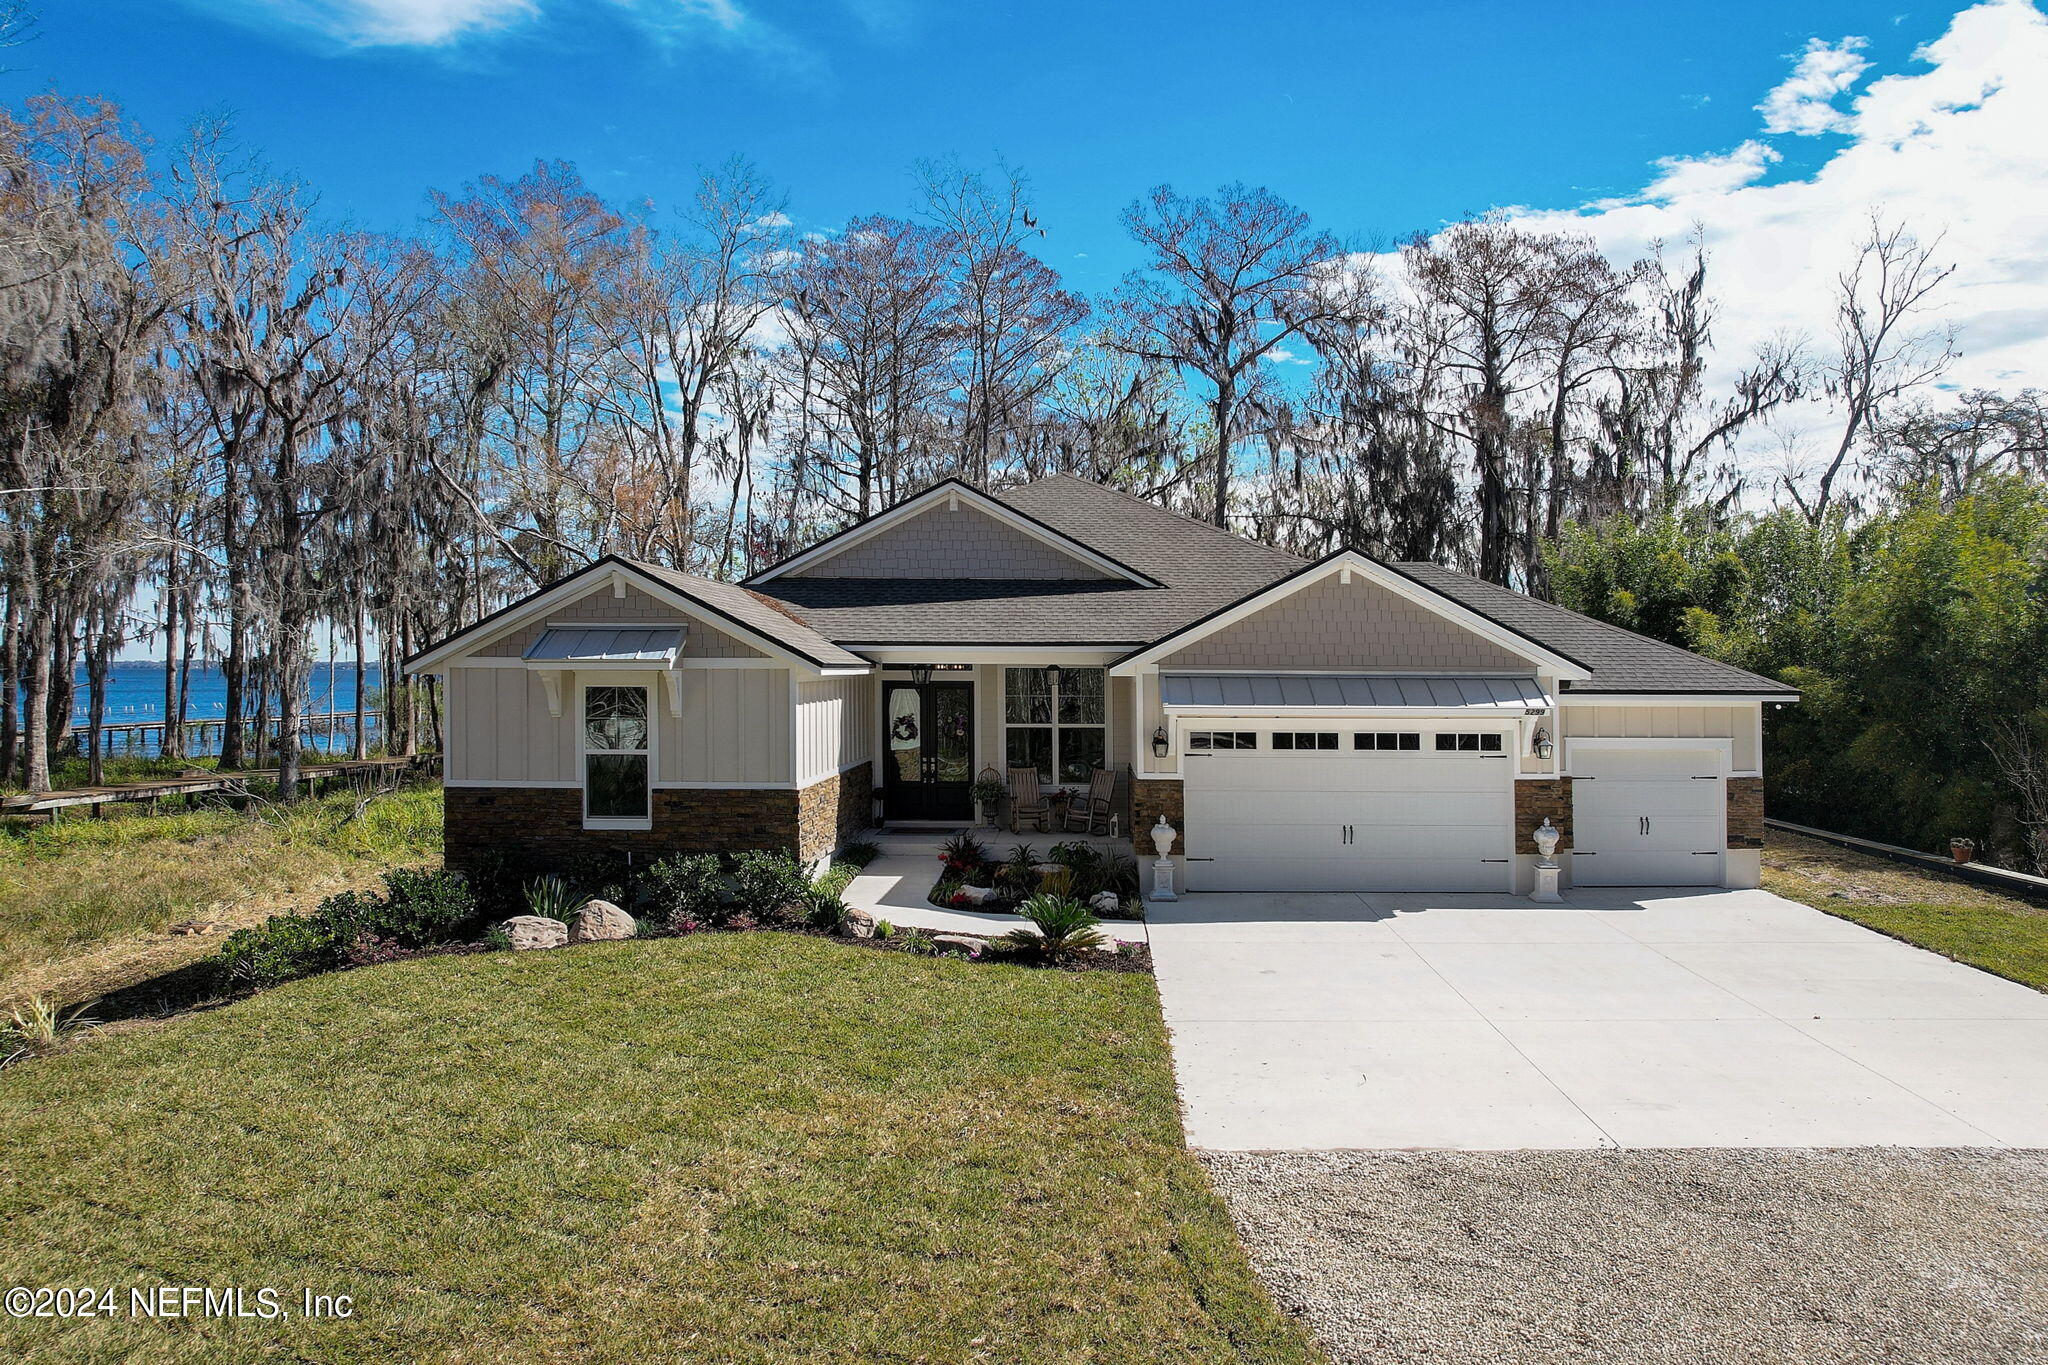 Green Cove Springs, FL home for sale located at 5299 Deer Island Road, Green Cove Springs, FL 32043